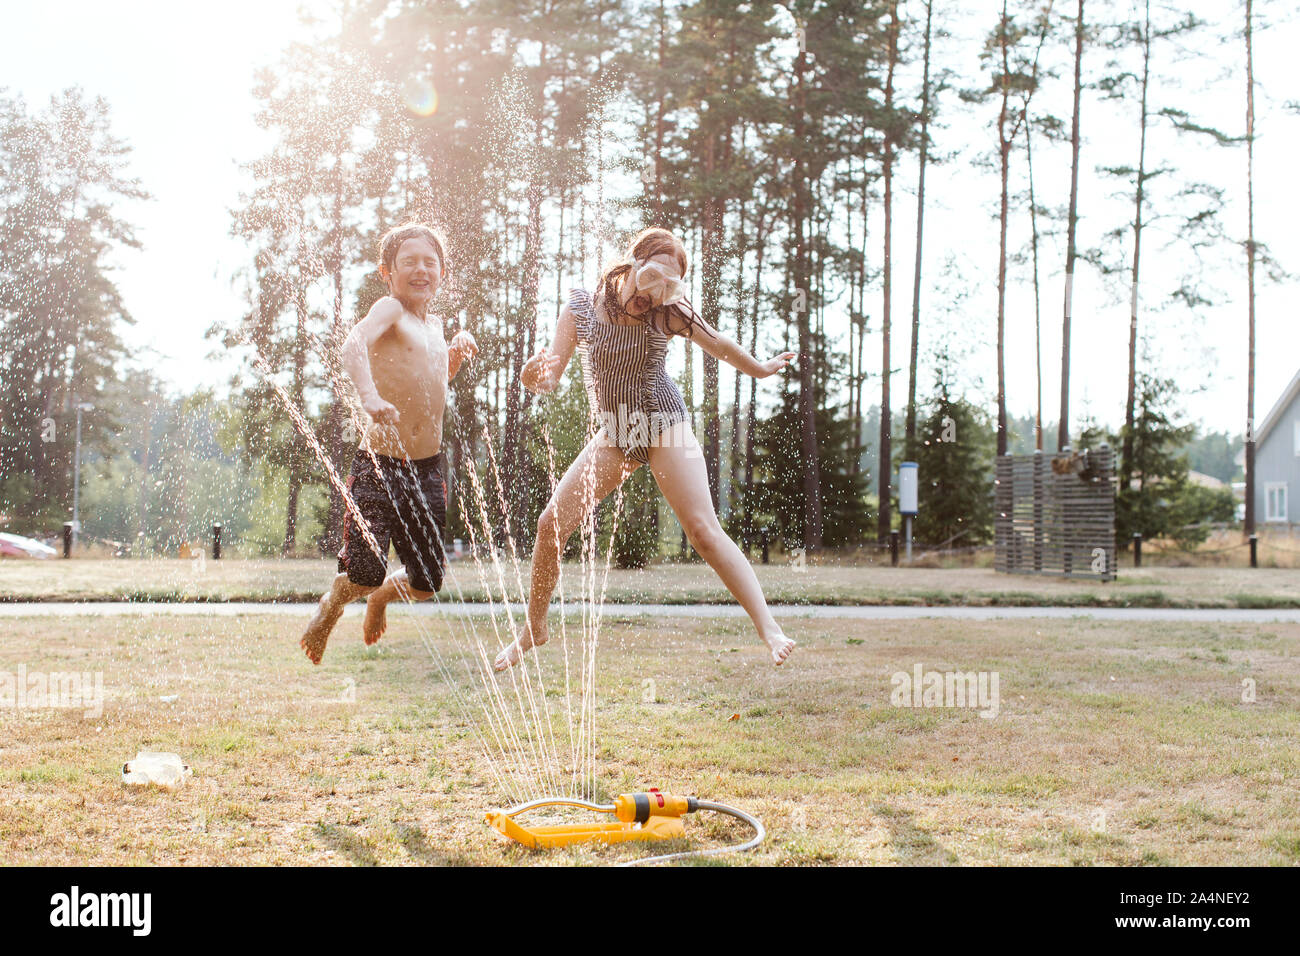 Cheerful kids playing with water Stock Photo